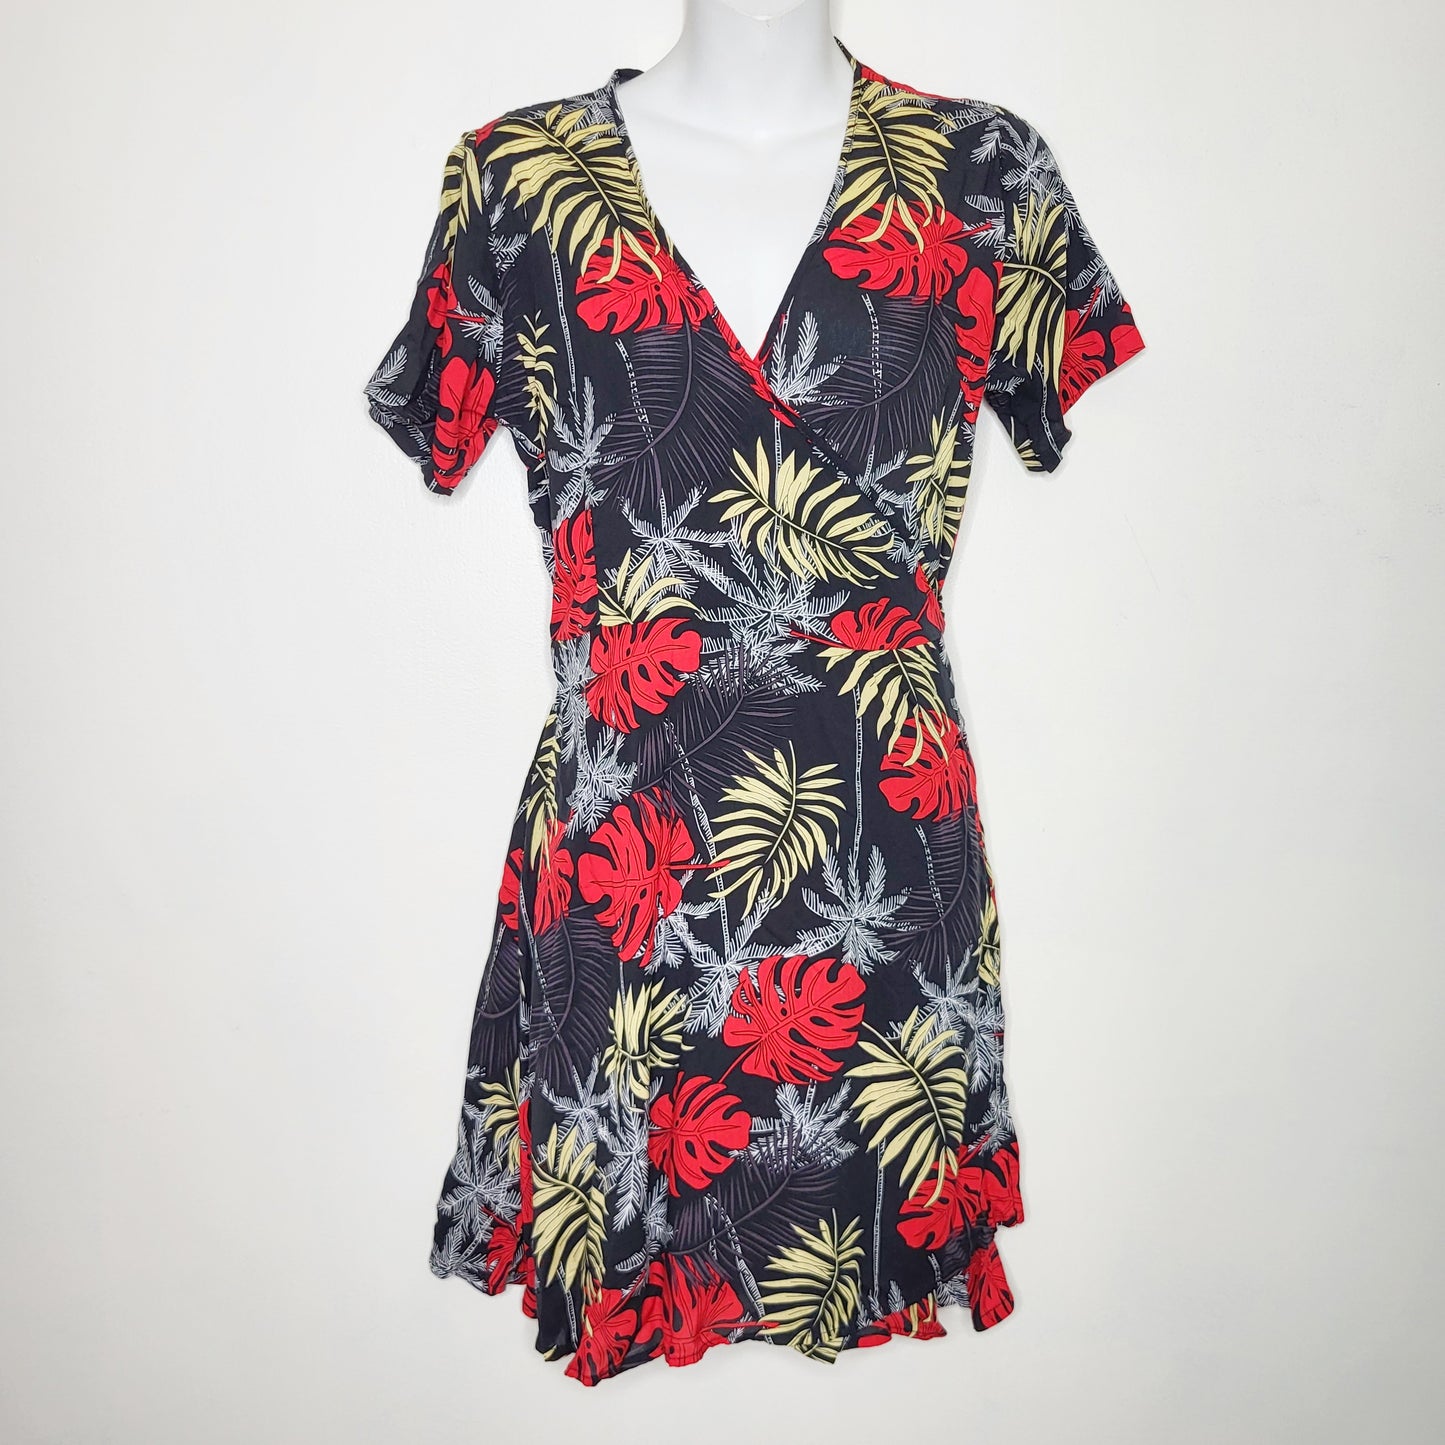 CSWRTZ1 - Leaf patterned rayon wrap dress, approx size Small, good condition